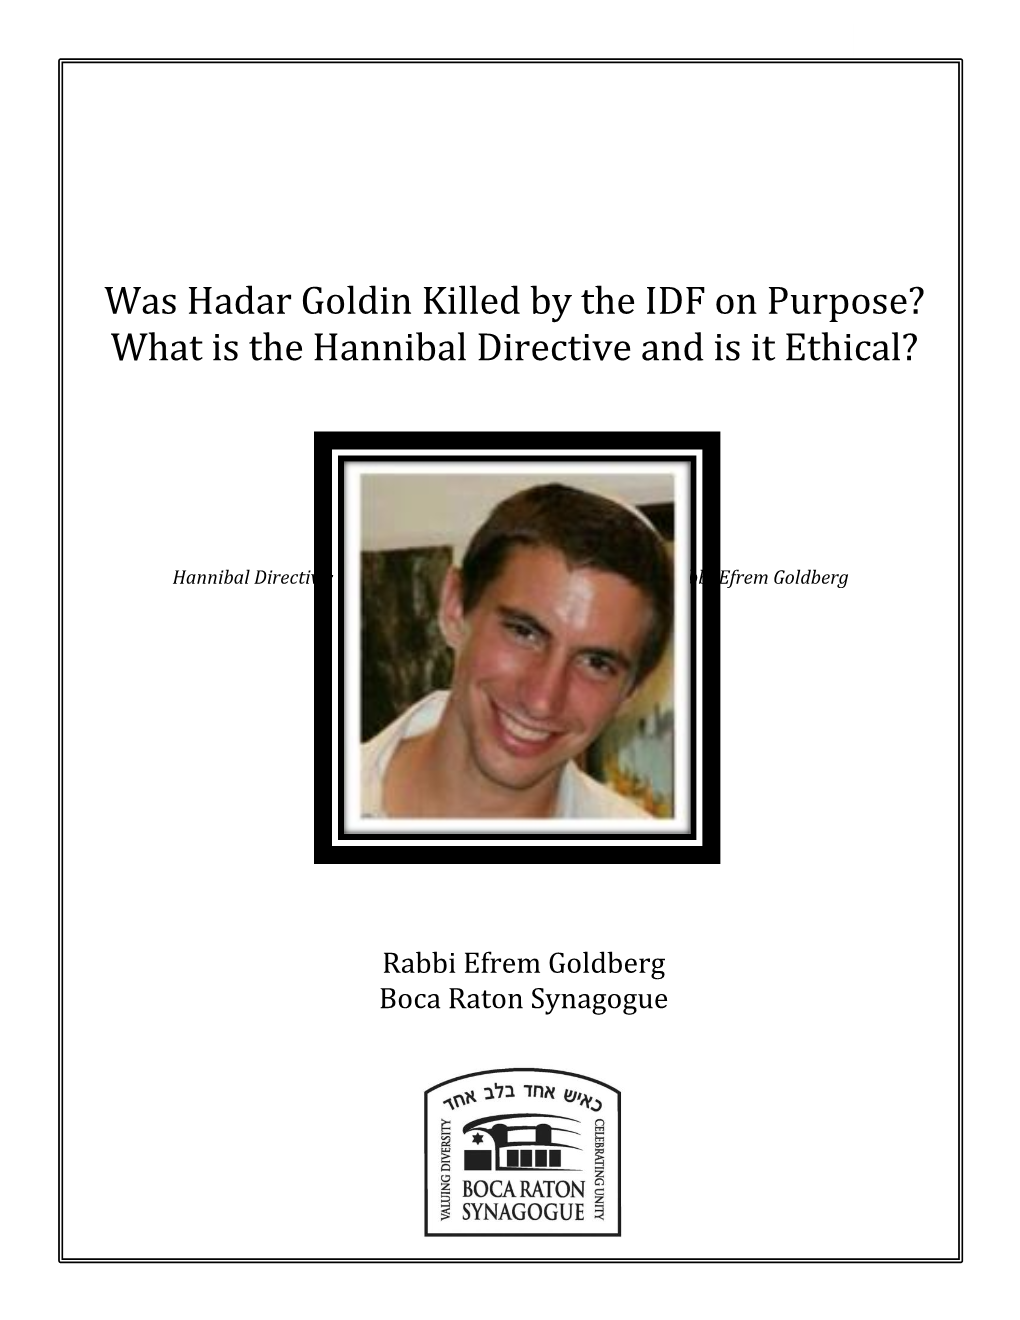 Was Hadar Goldin Killed by the IDF on Purpose? What Is the Hannibal Directive and Is It Ethical?